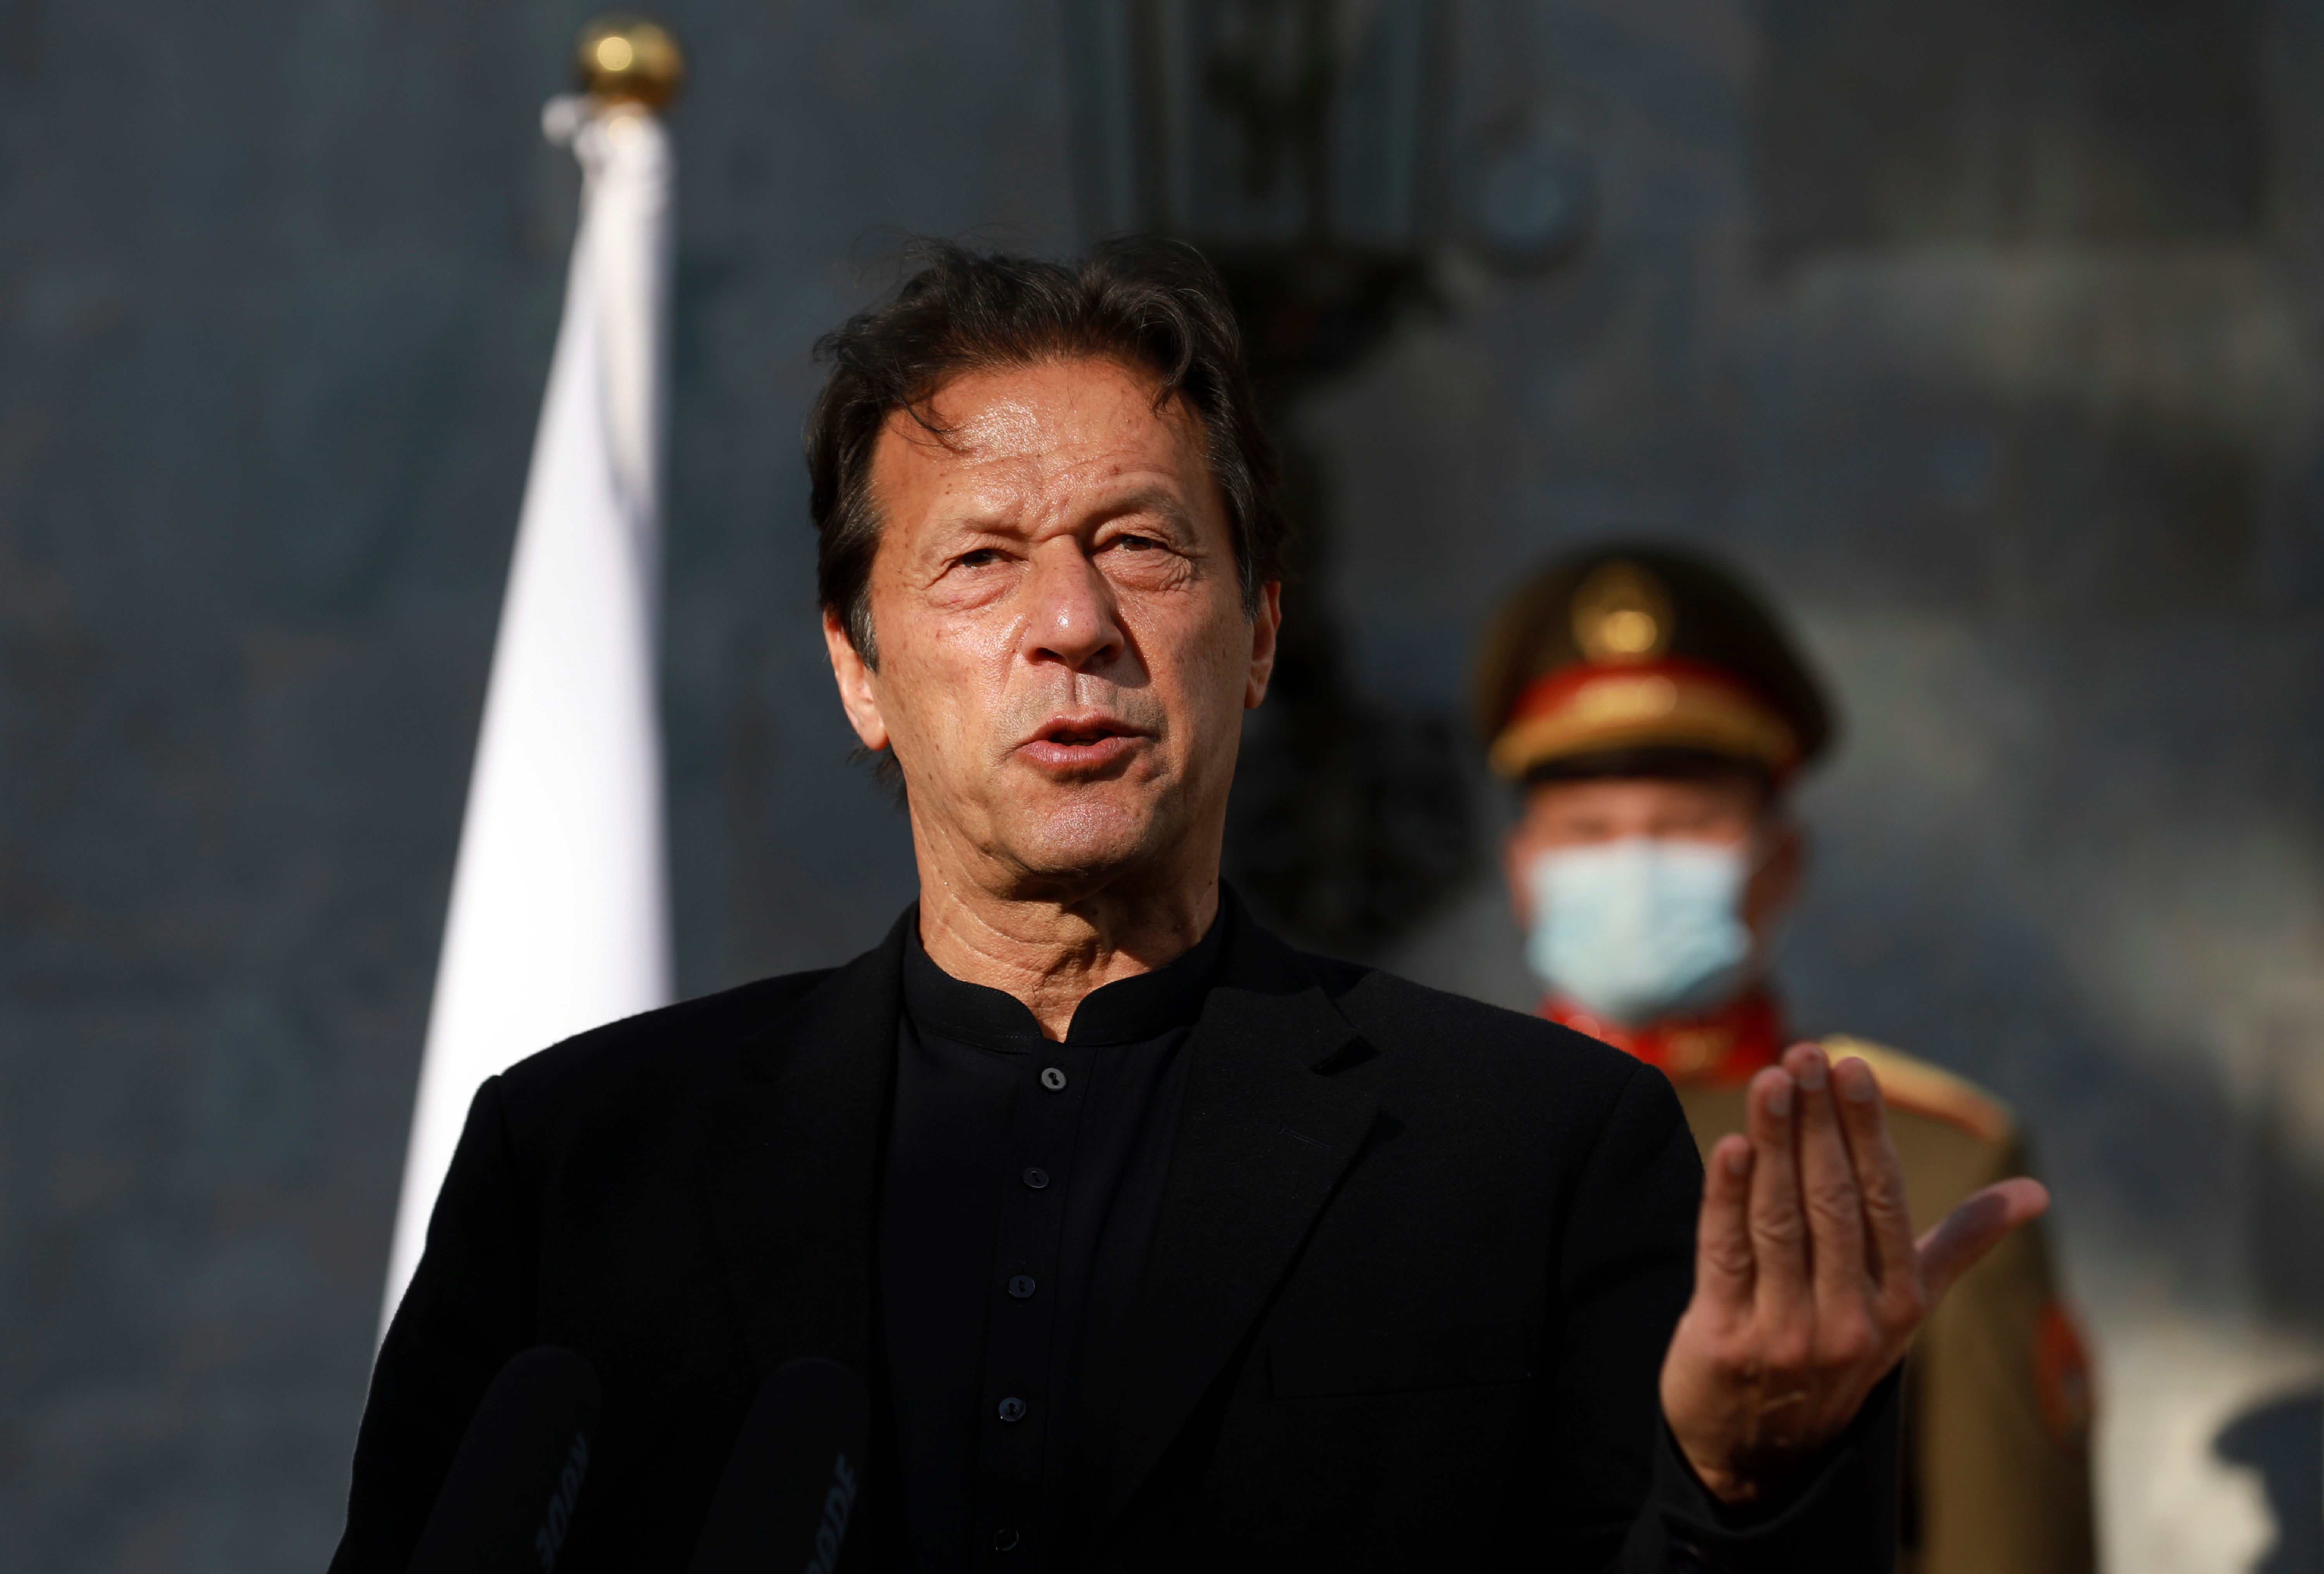 Pakistan prime minister Imran Khan said it was a day of shame for the country